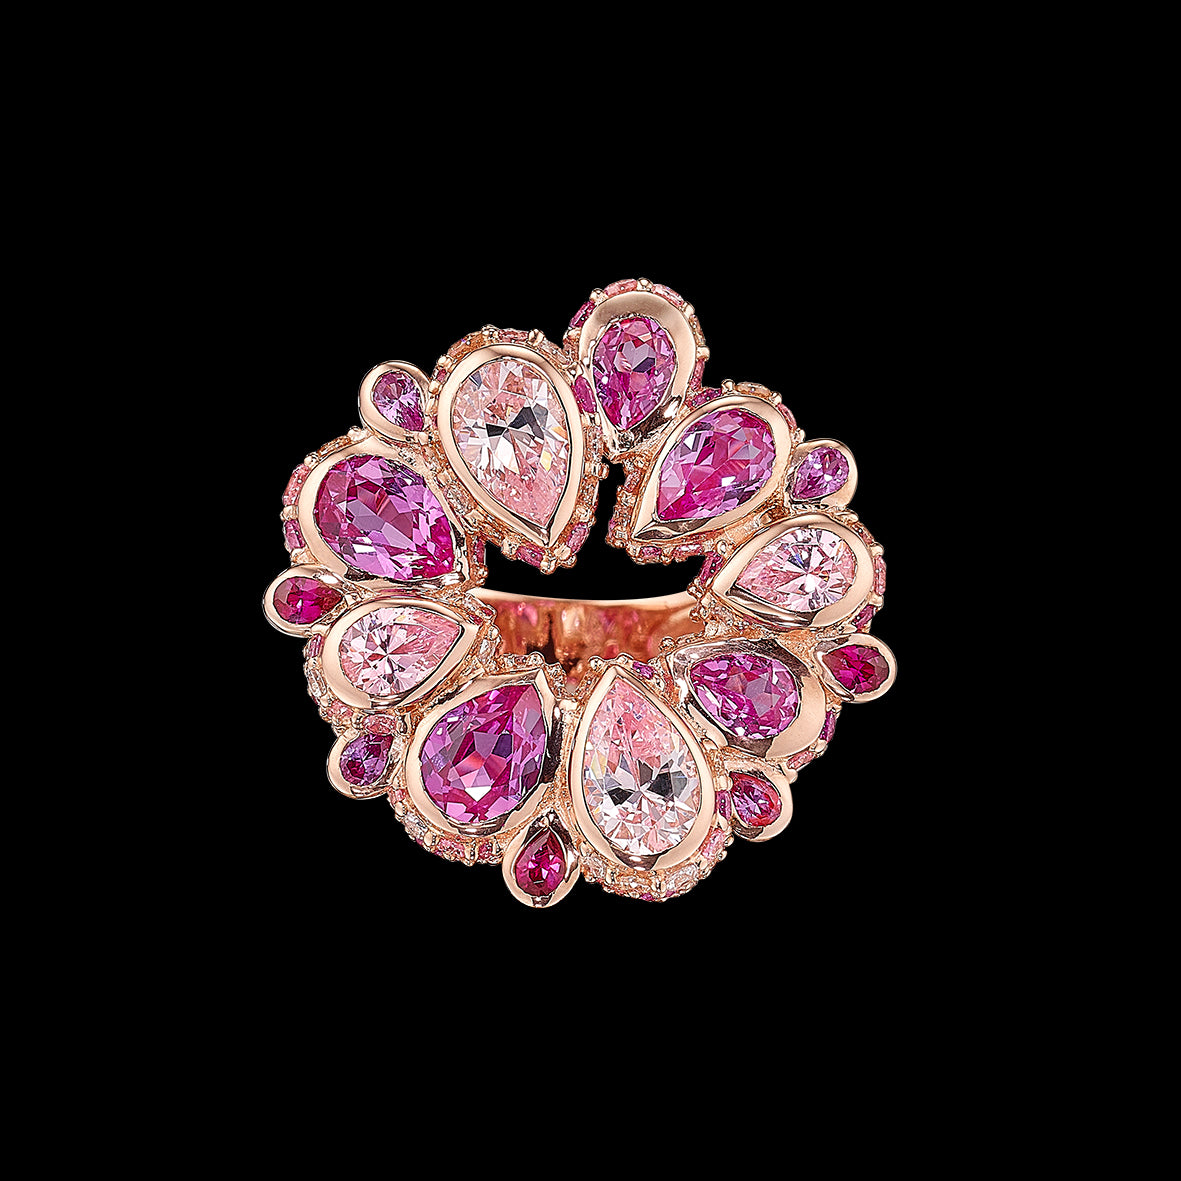 Fuchsia Pavé Panettone Ring, Ring, Anabela Chan Joaillerie - Fine jewelry with laboratory grown and created gemstones hand-crafted in the United Kingdom. Anabela Chan Joaillerie is the first fine jewellery brand in the world to champion laboratory-grown and created gemstones with high jewellery design, artisanal craftsmanship and a focus on ethical and sustainable innovations.